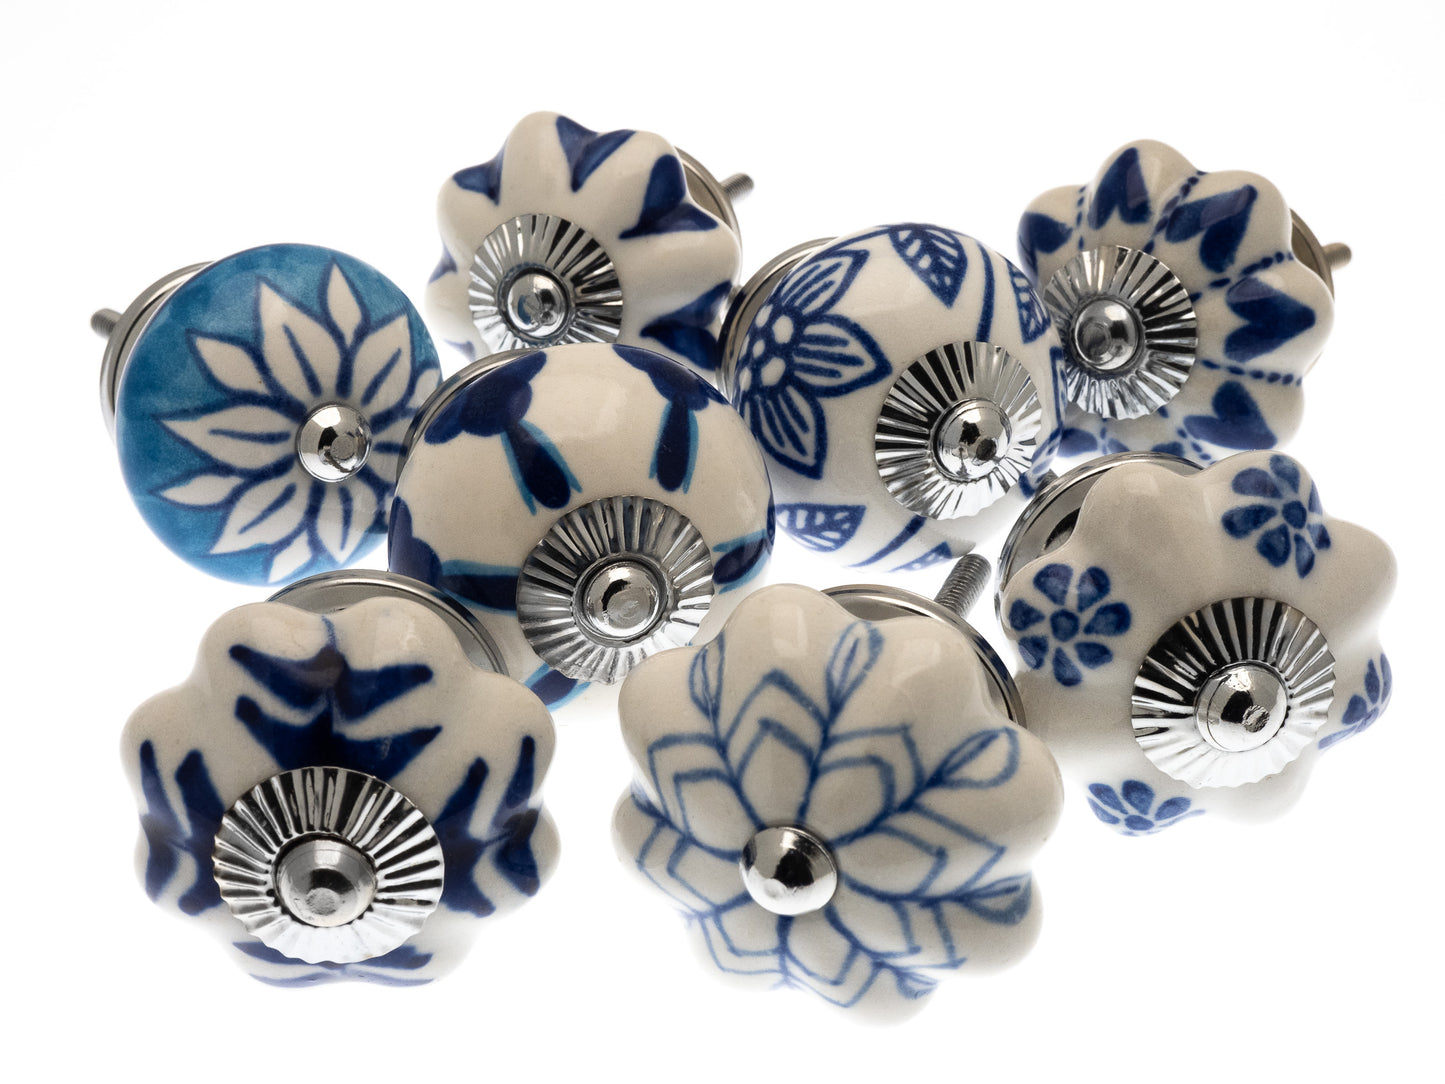 Cupboard Knobs in Cobalt Blue and Turquoise Pack of 8